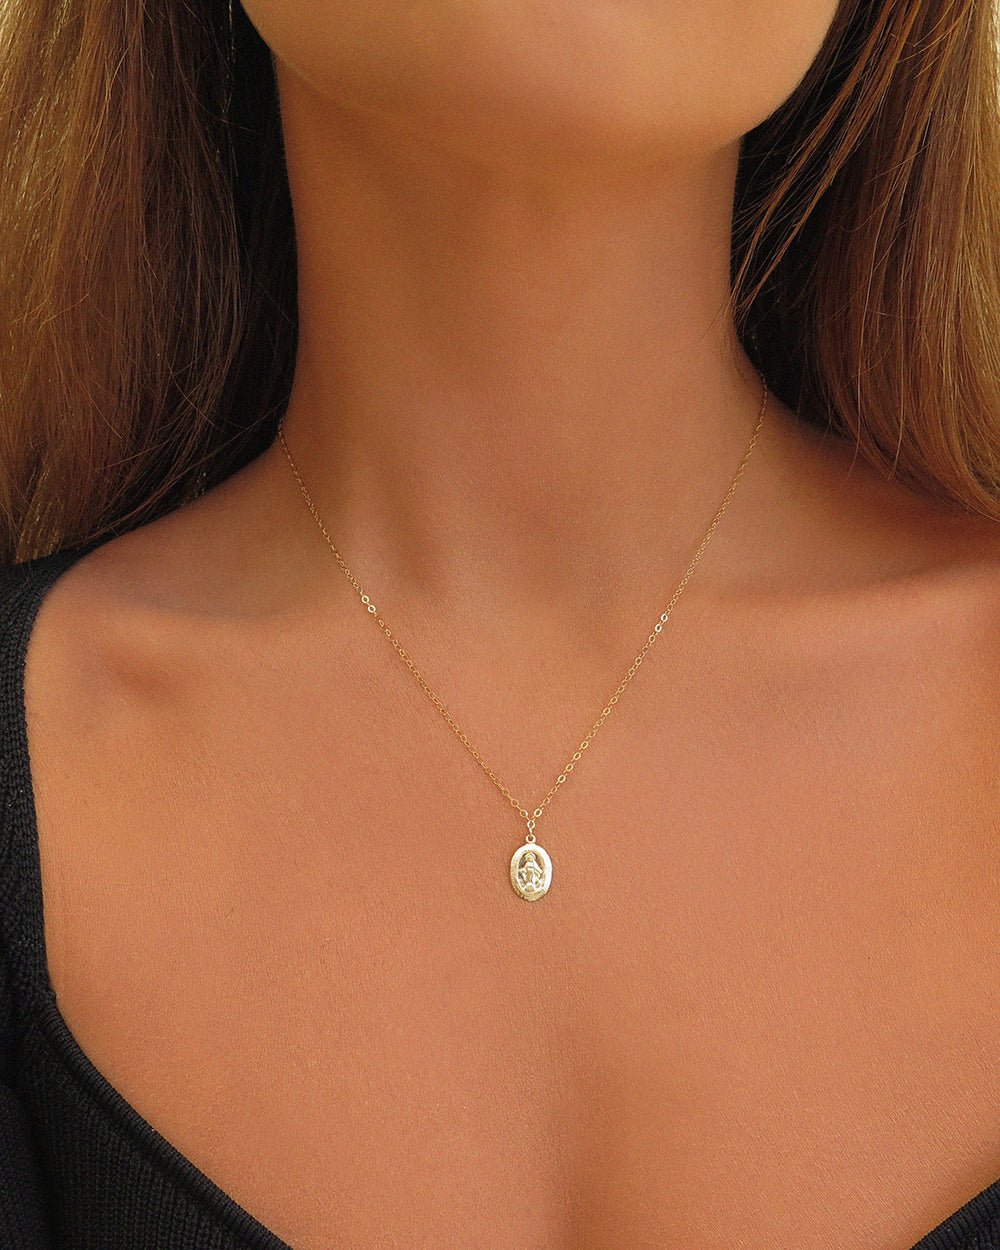 Load image into Gallery viewer, SMALL MIRACULOUS MEDAL NECKLACE- 14k Yellow Gold - The Littl - Deluxe Chain - 37cm (choker) Necklaces
